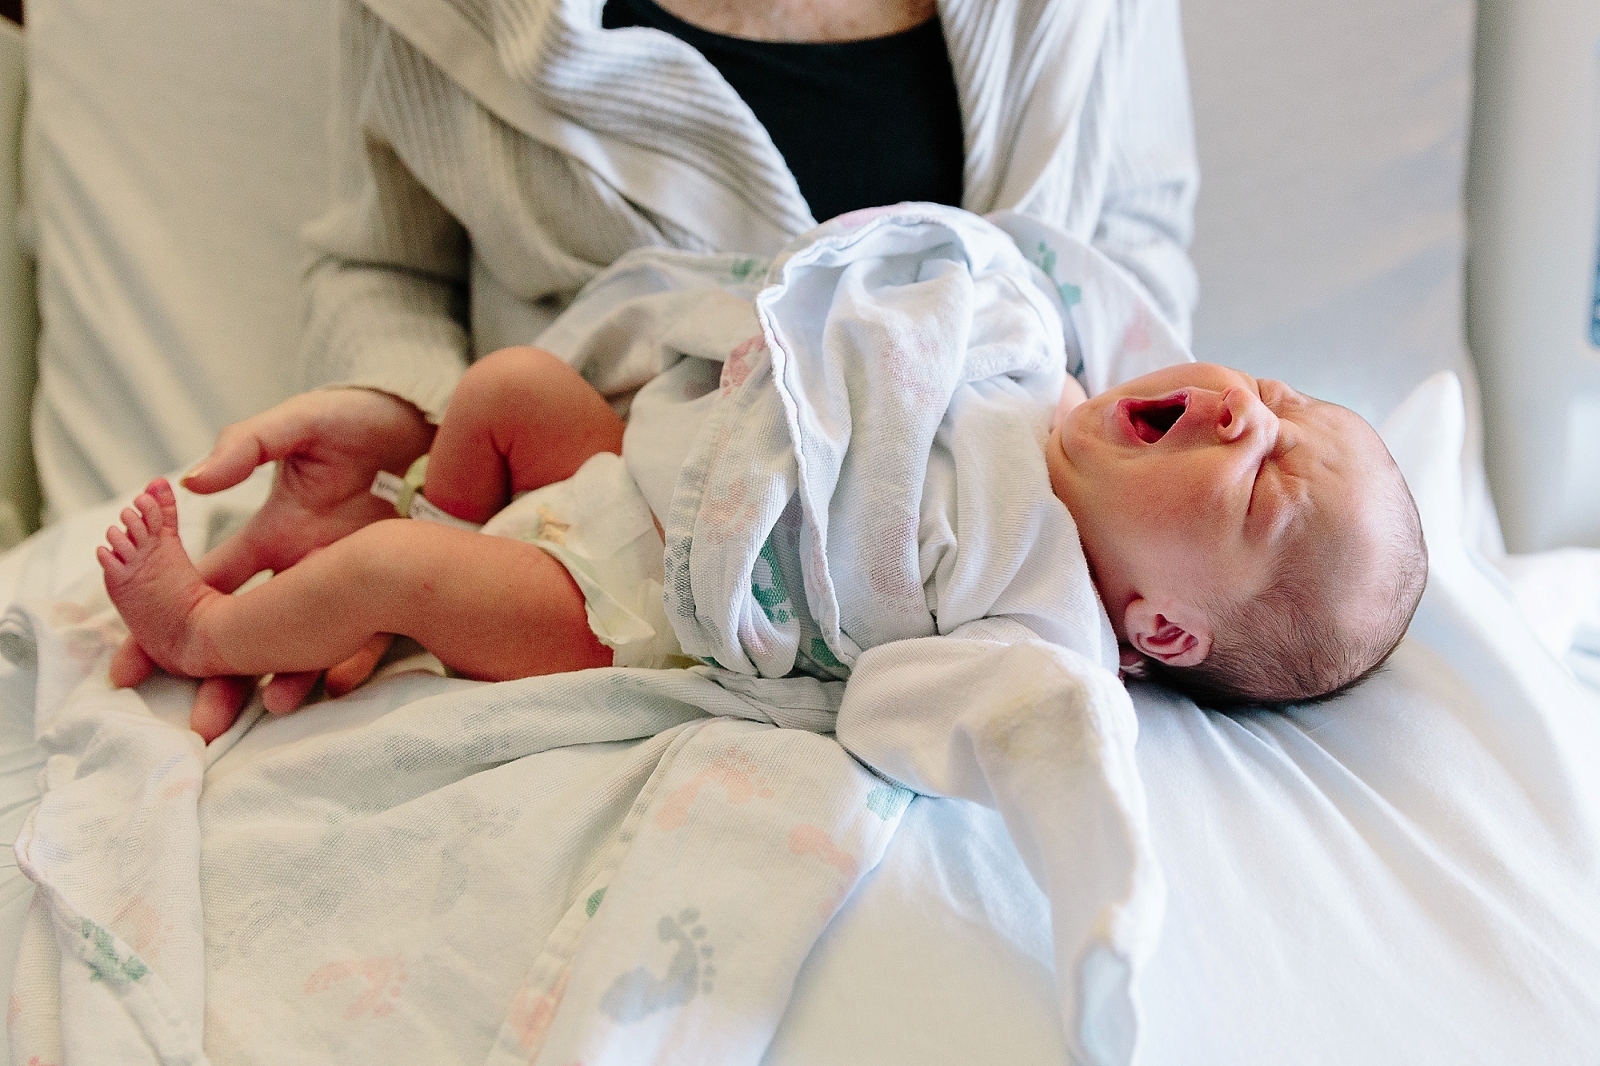 Newborn baby stretches and yawns in hospital